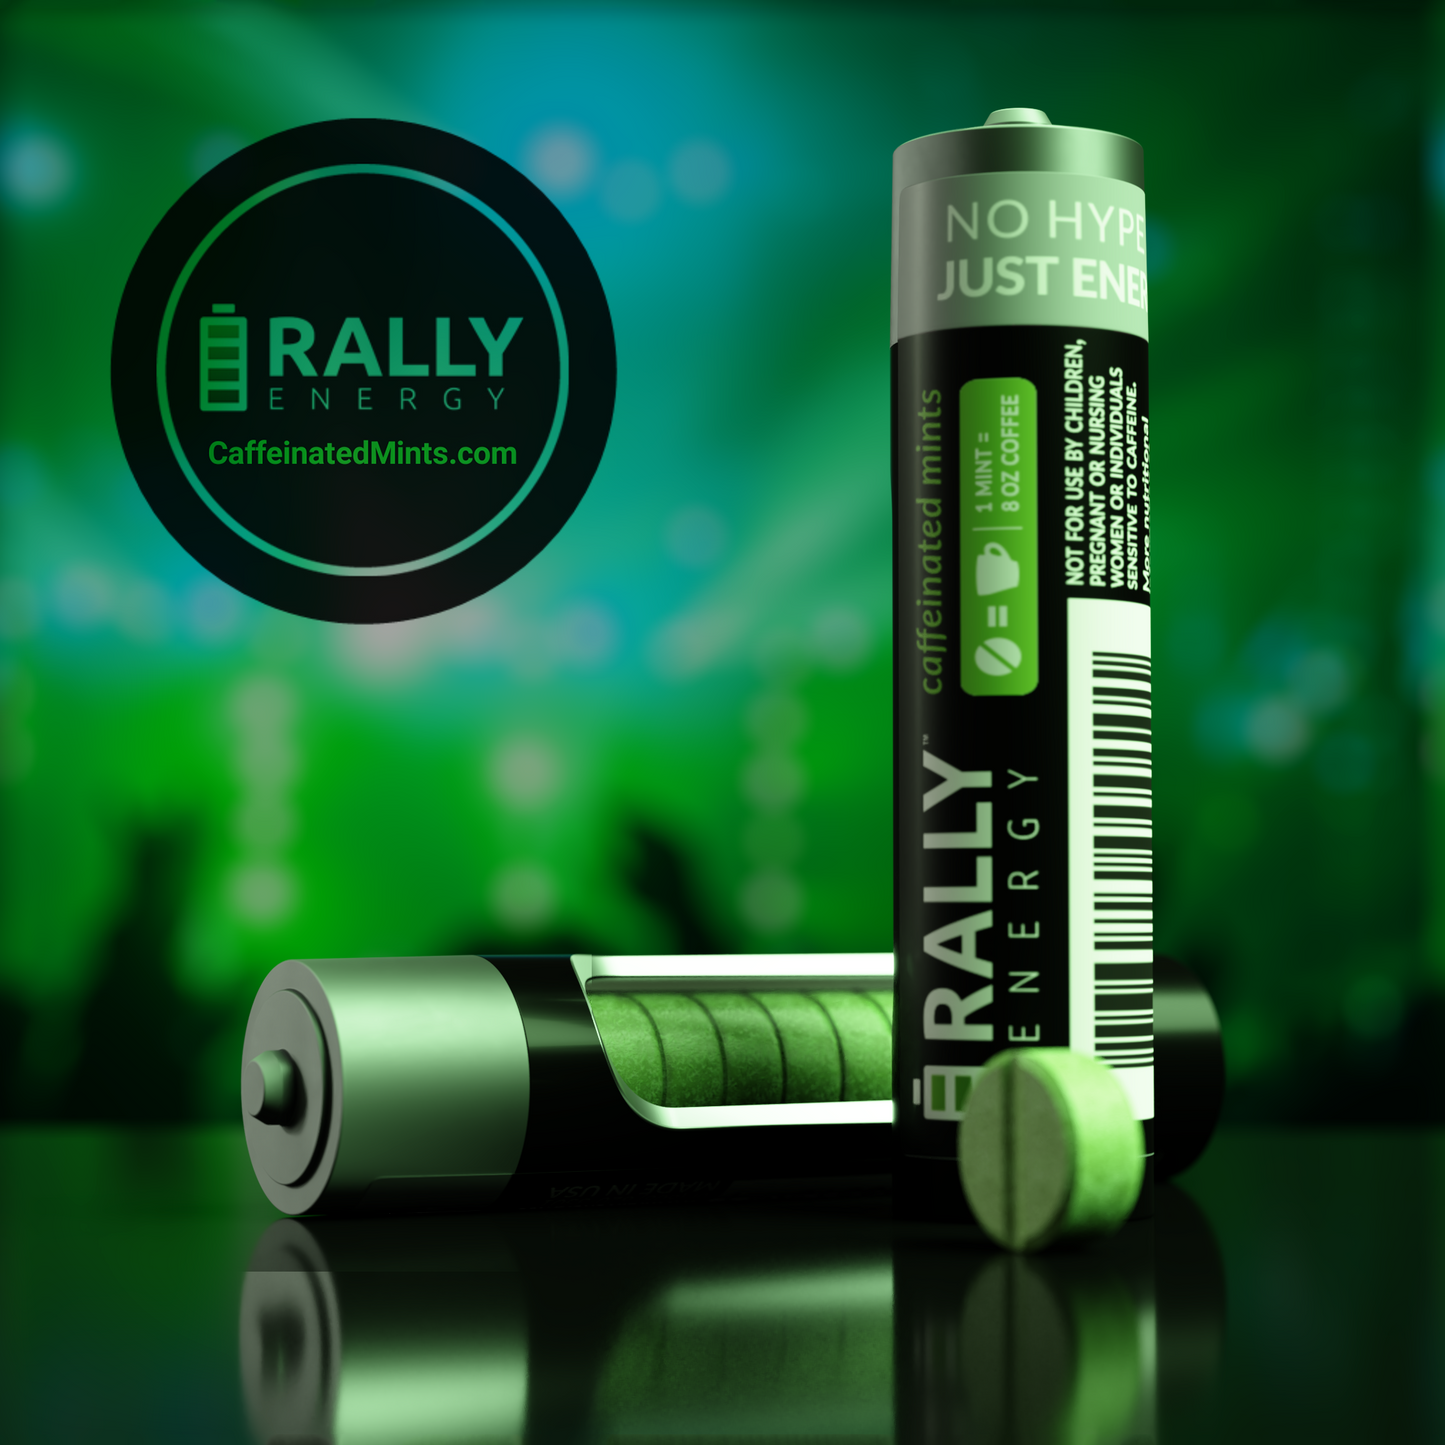 Display Case of Rally Energy Mints (20-Pack)